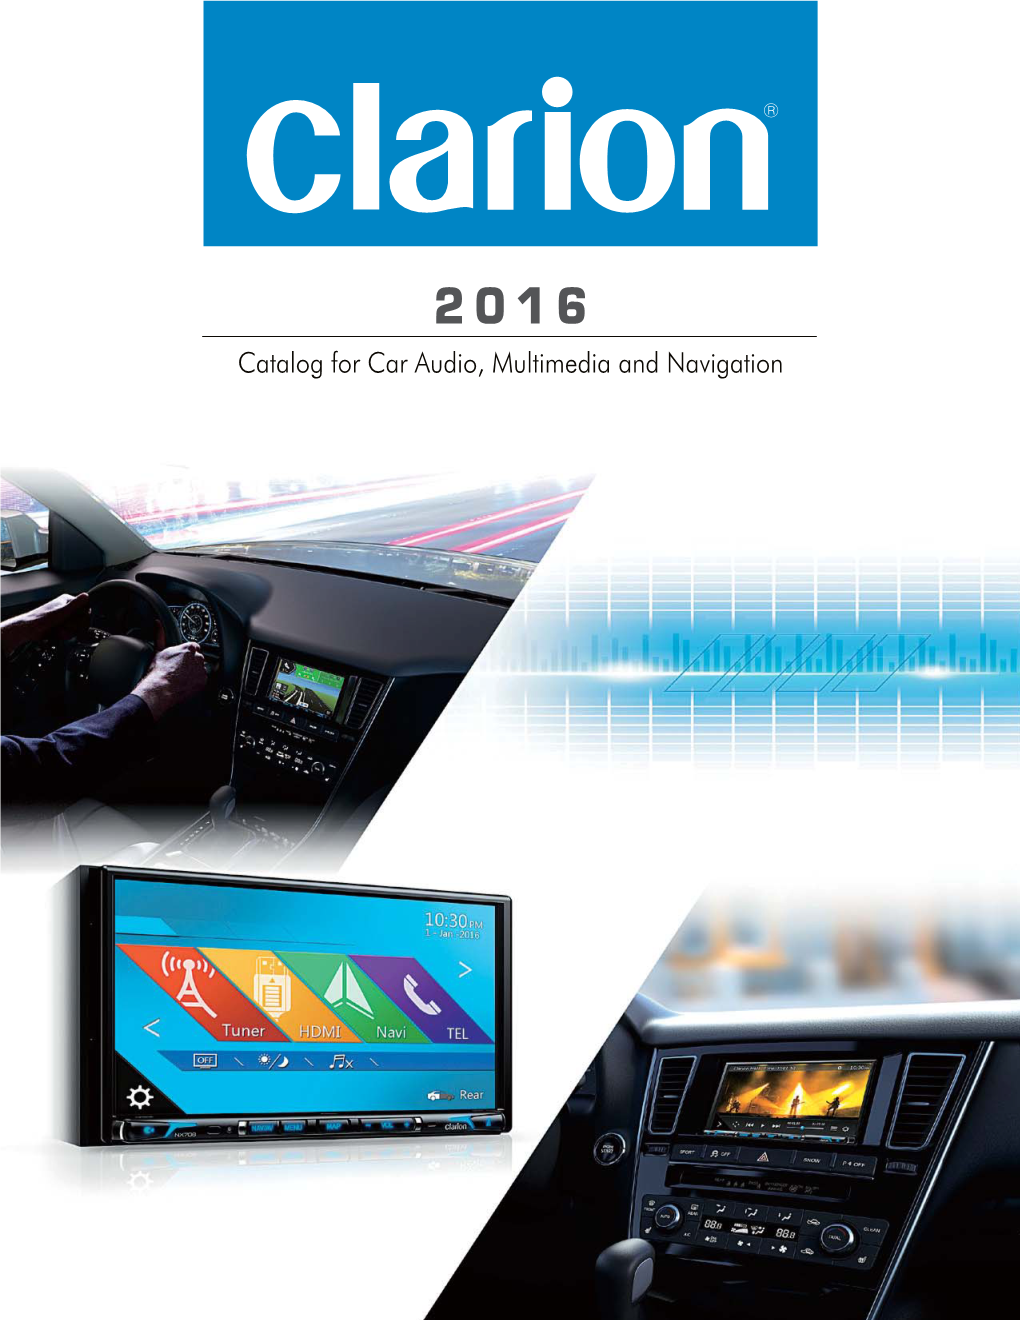 Catalog for Car Audio, Multimedia and Navigation Innovation Is at the Heart of Everything We Do